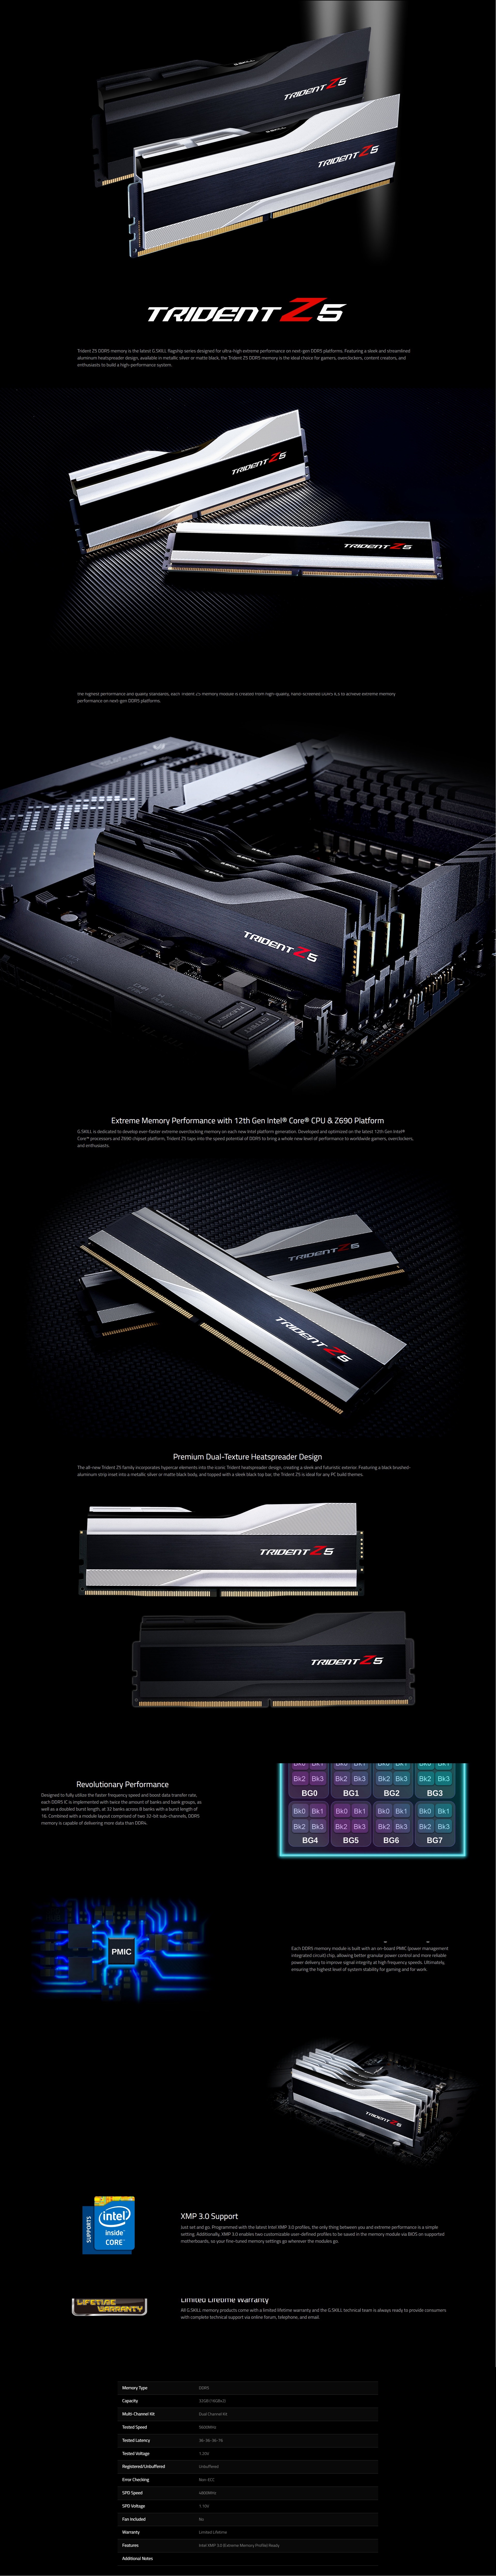 A large marketing image providing additional information about the product G.Skill 32GB Kit (2x16GB) DDR5 Trident Z5 C36 5600Mhz - Black - Additional alt info not provided